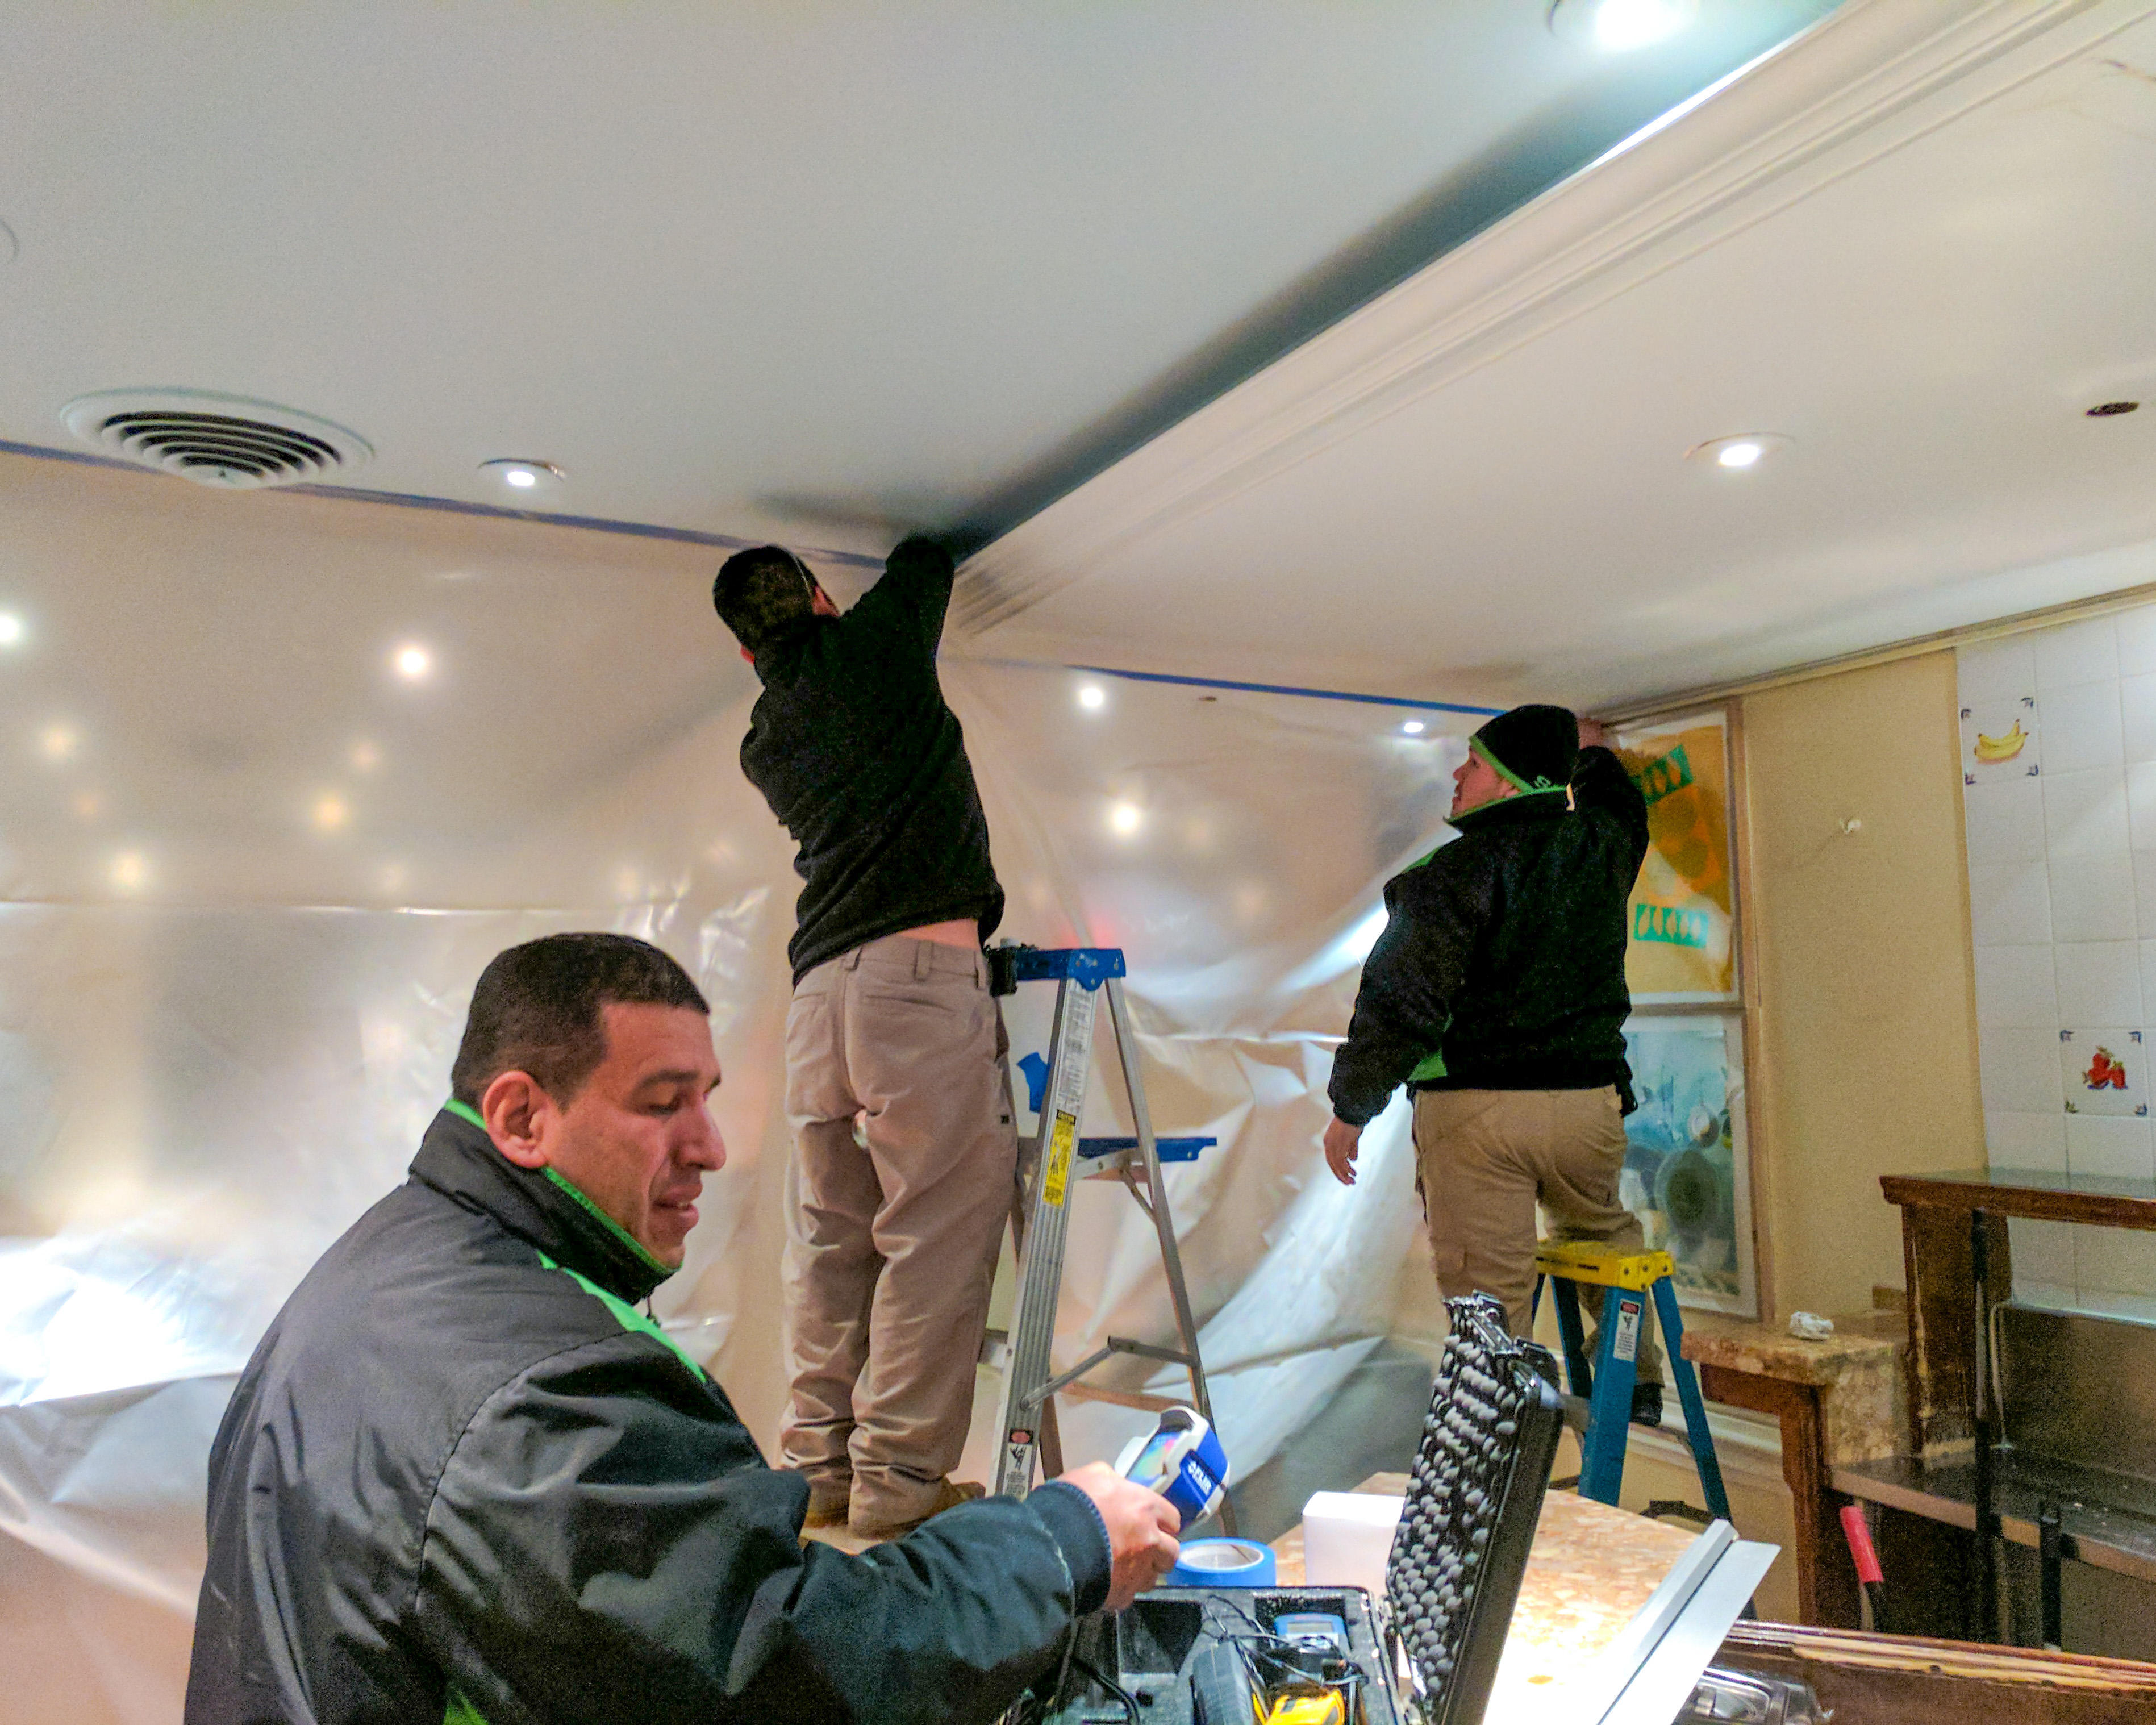 SERVPRO of Montclair/West Orange is the premier choice when it comes to residential or commercial water damage restoration in the Montclair area.